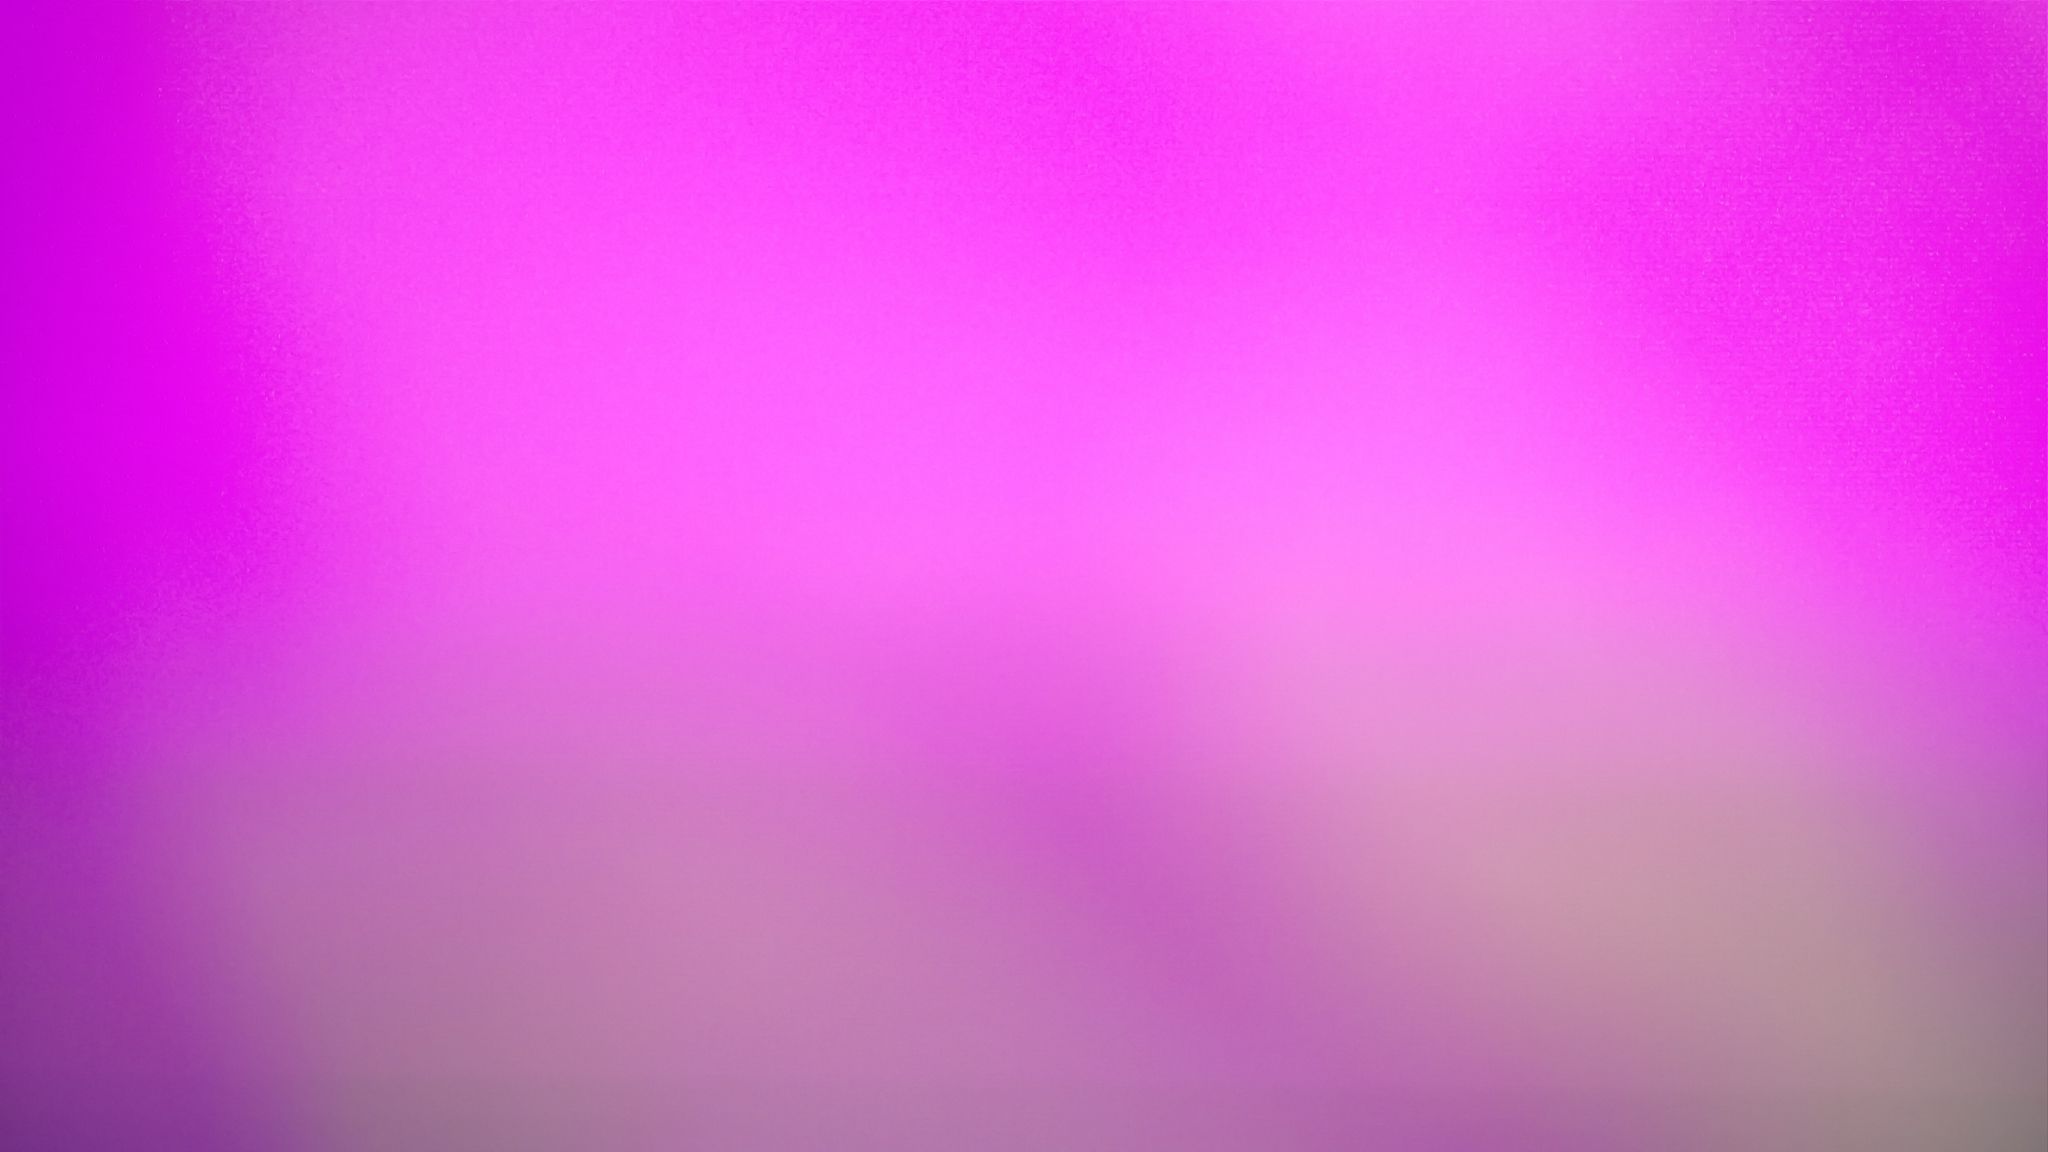 Download wallpaper 2048x1152 gradient, pink, color, bright ultrawide  monitor hd background